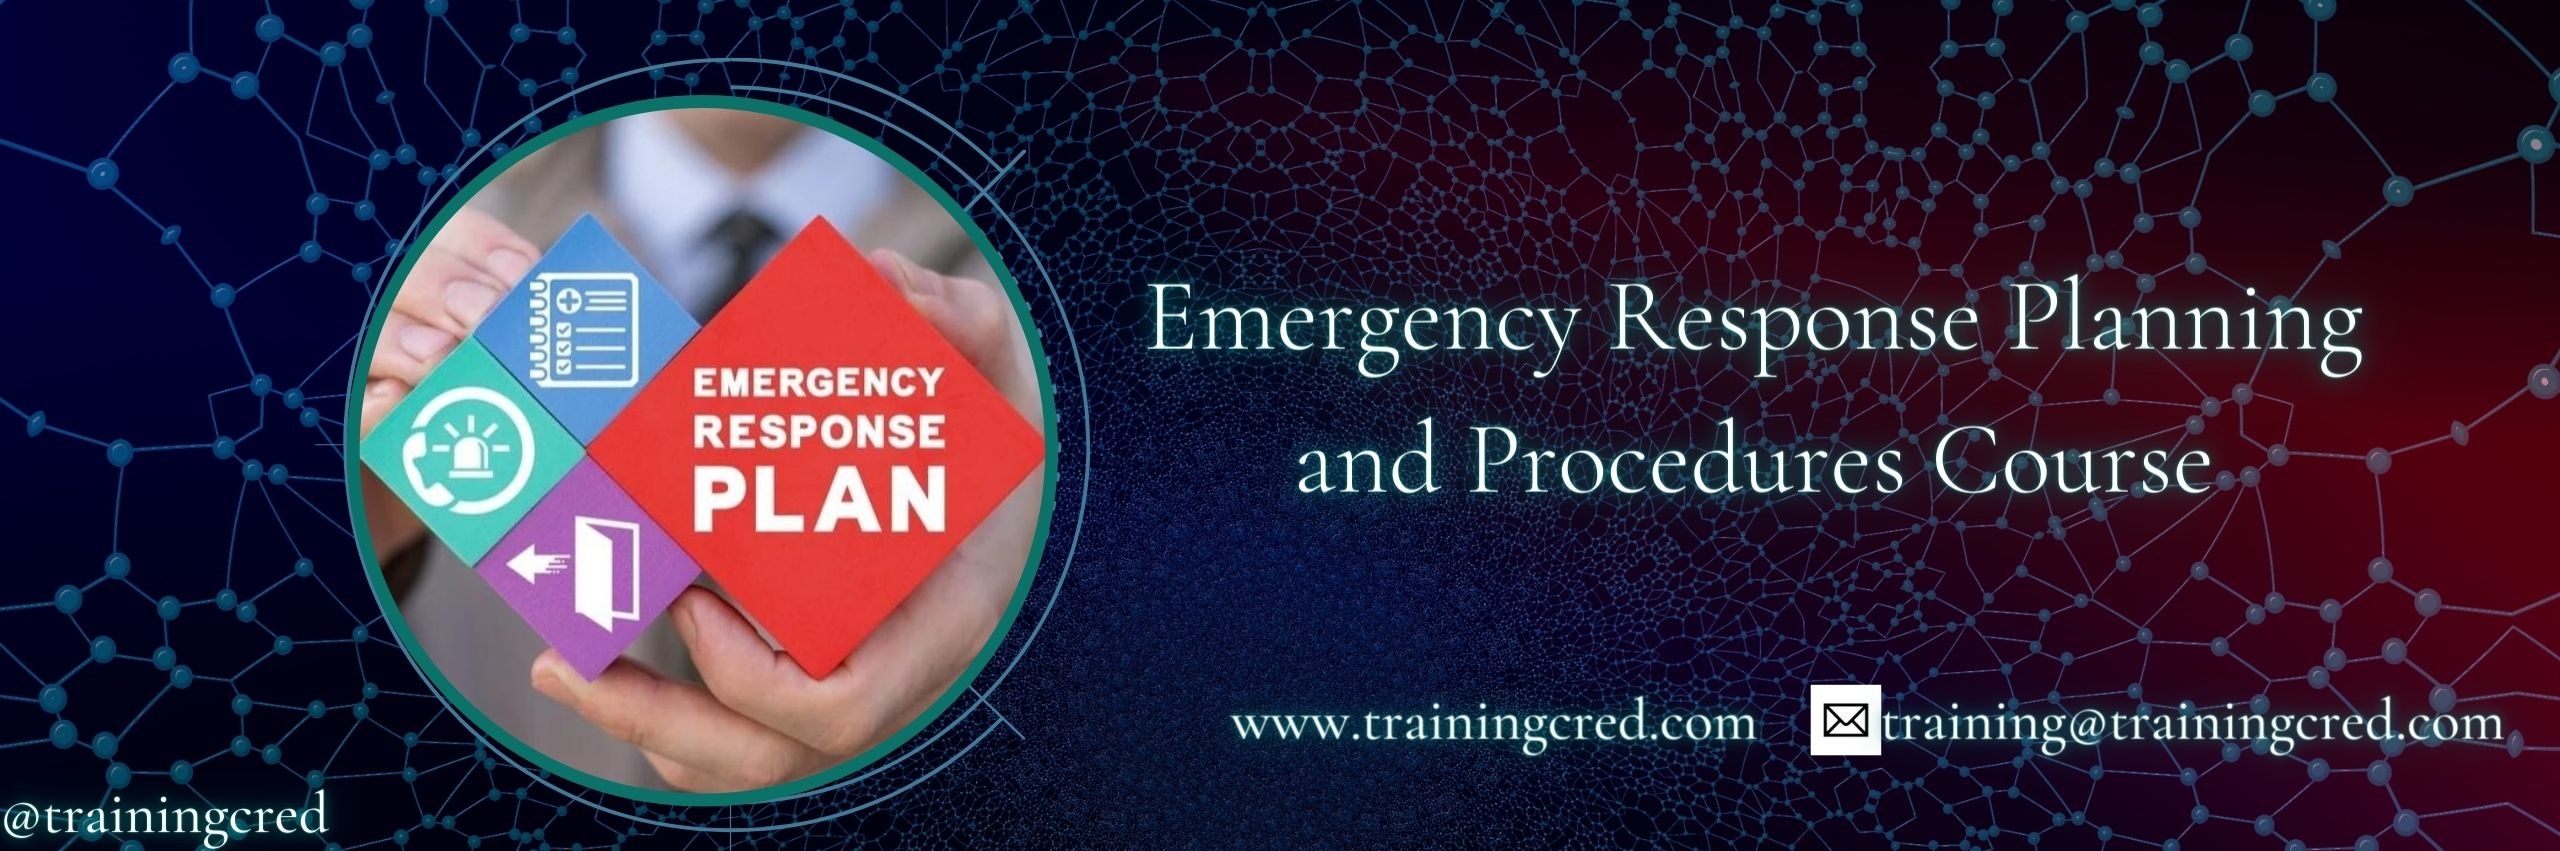 Emergency Response Planning and Procedures Training